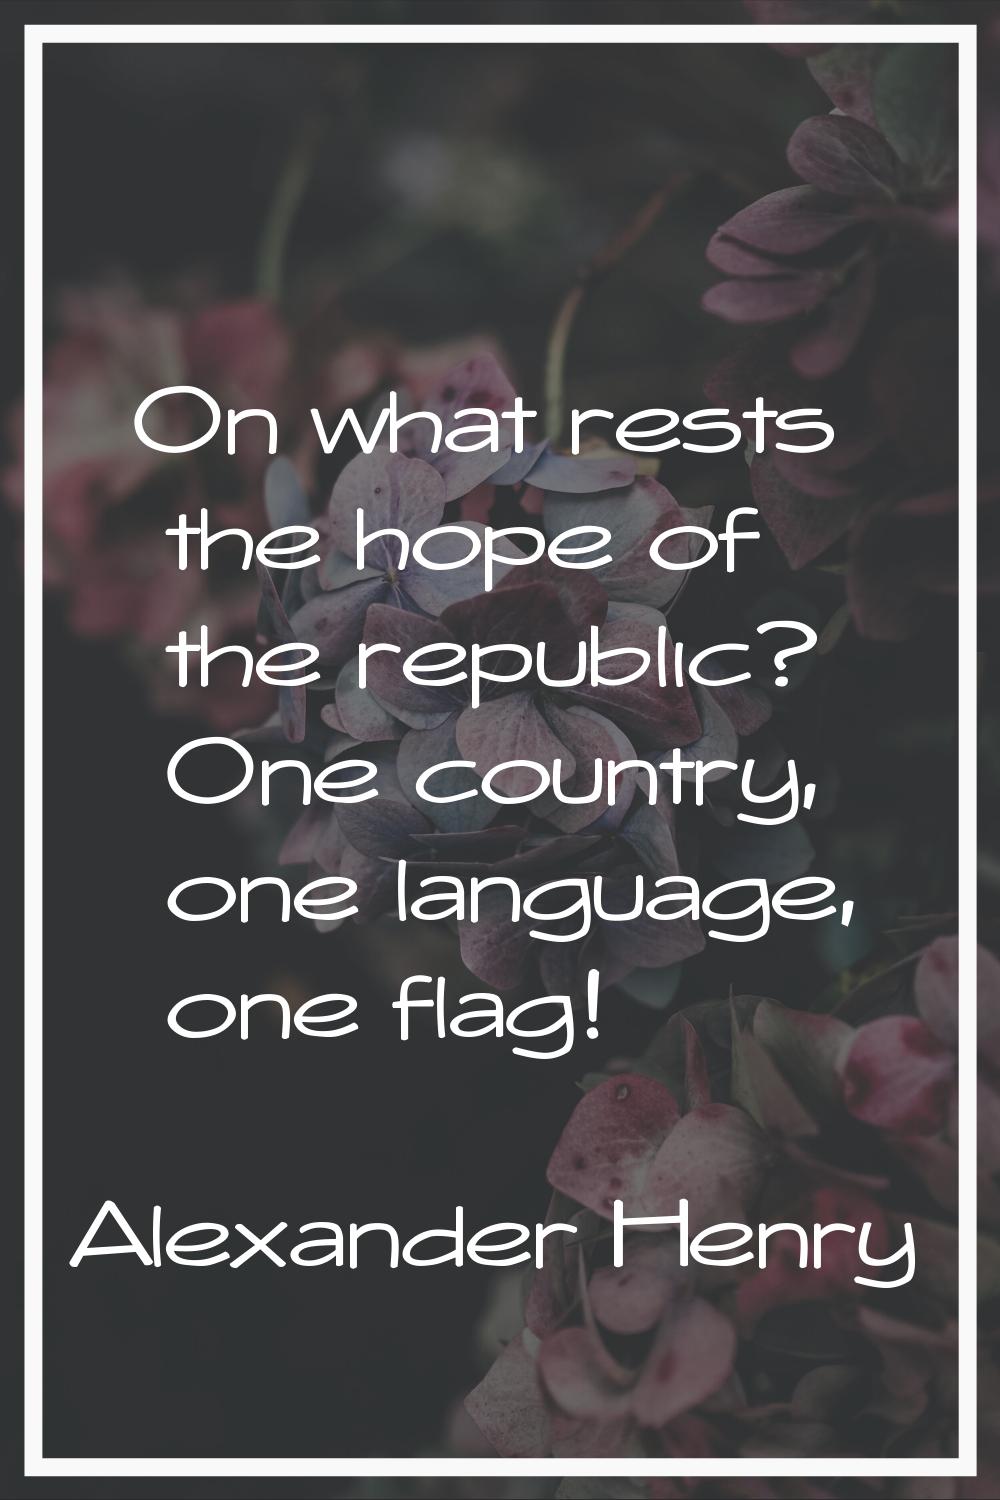 On what rests the hope of the republic? One country, one language, one flag!